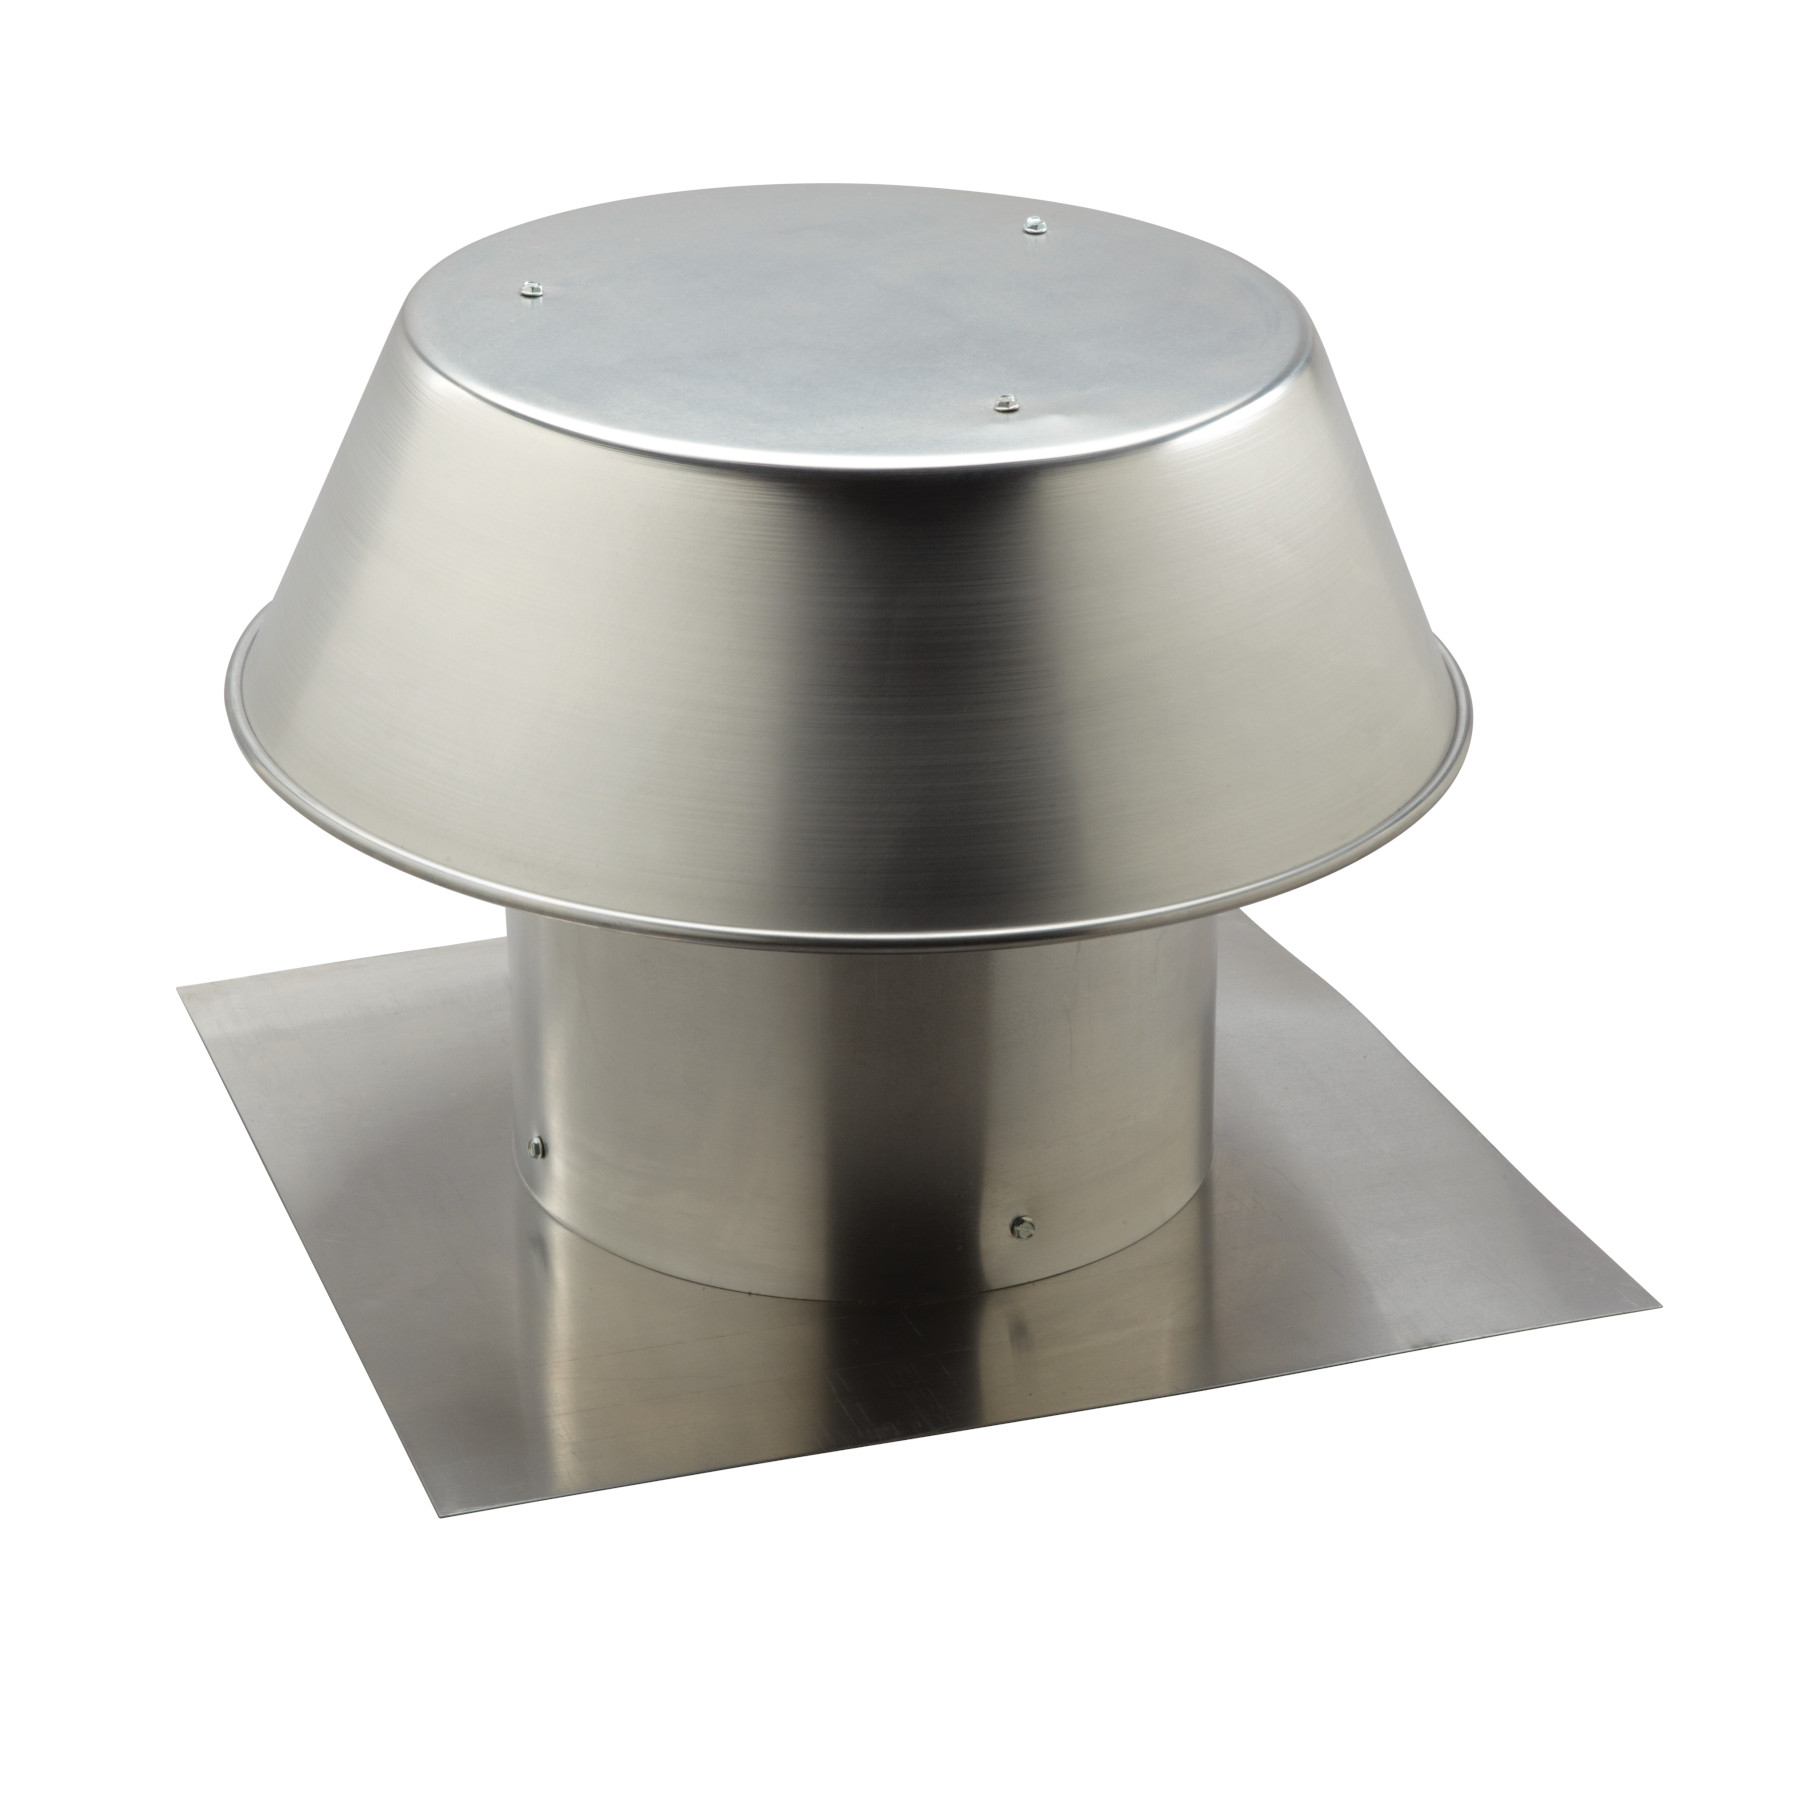 Broan NuTone Aluminum Wall Cap for 12 Inch Round Duct Ventilation Venting Part 